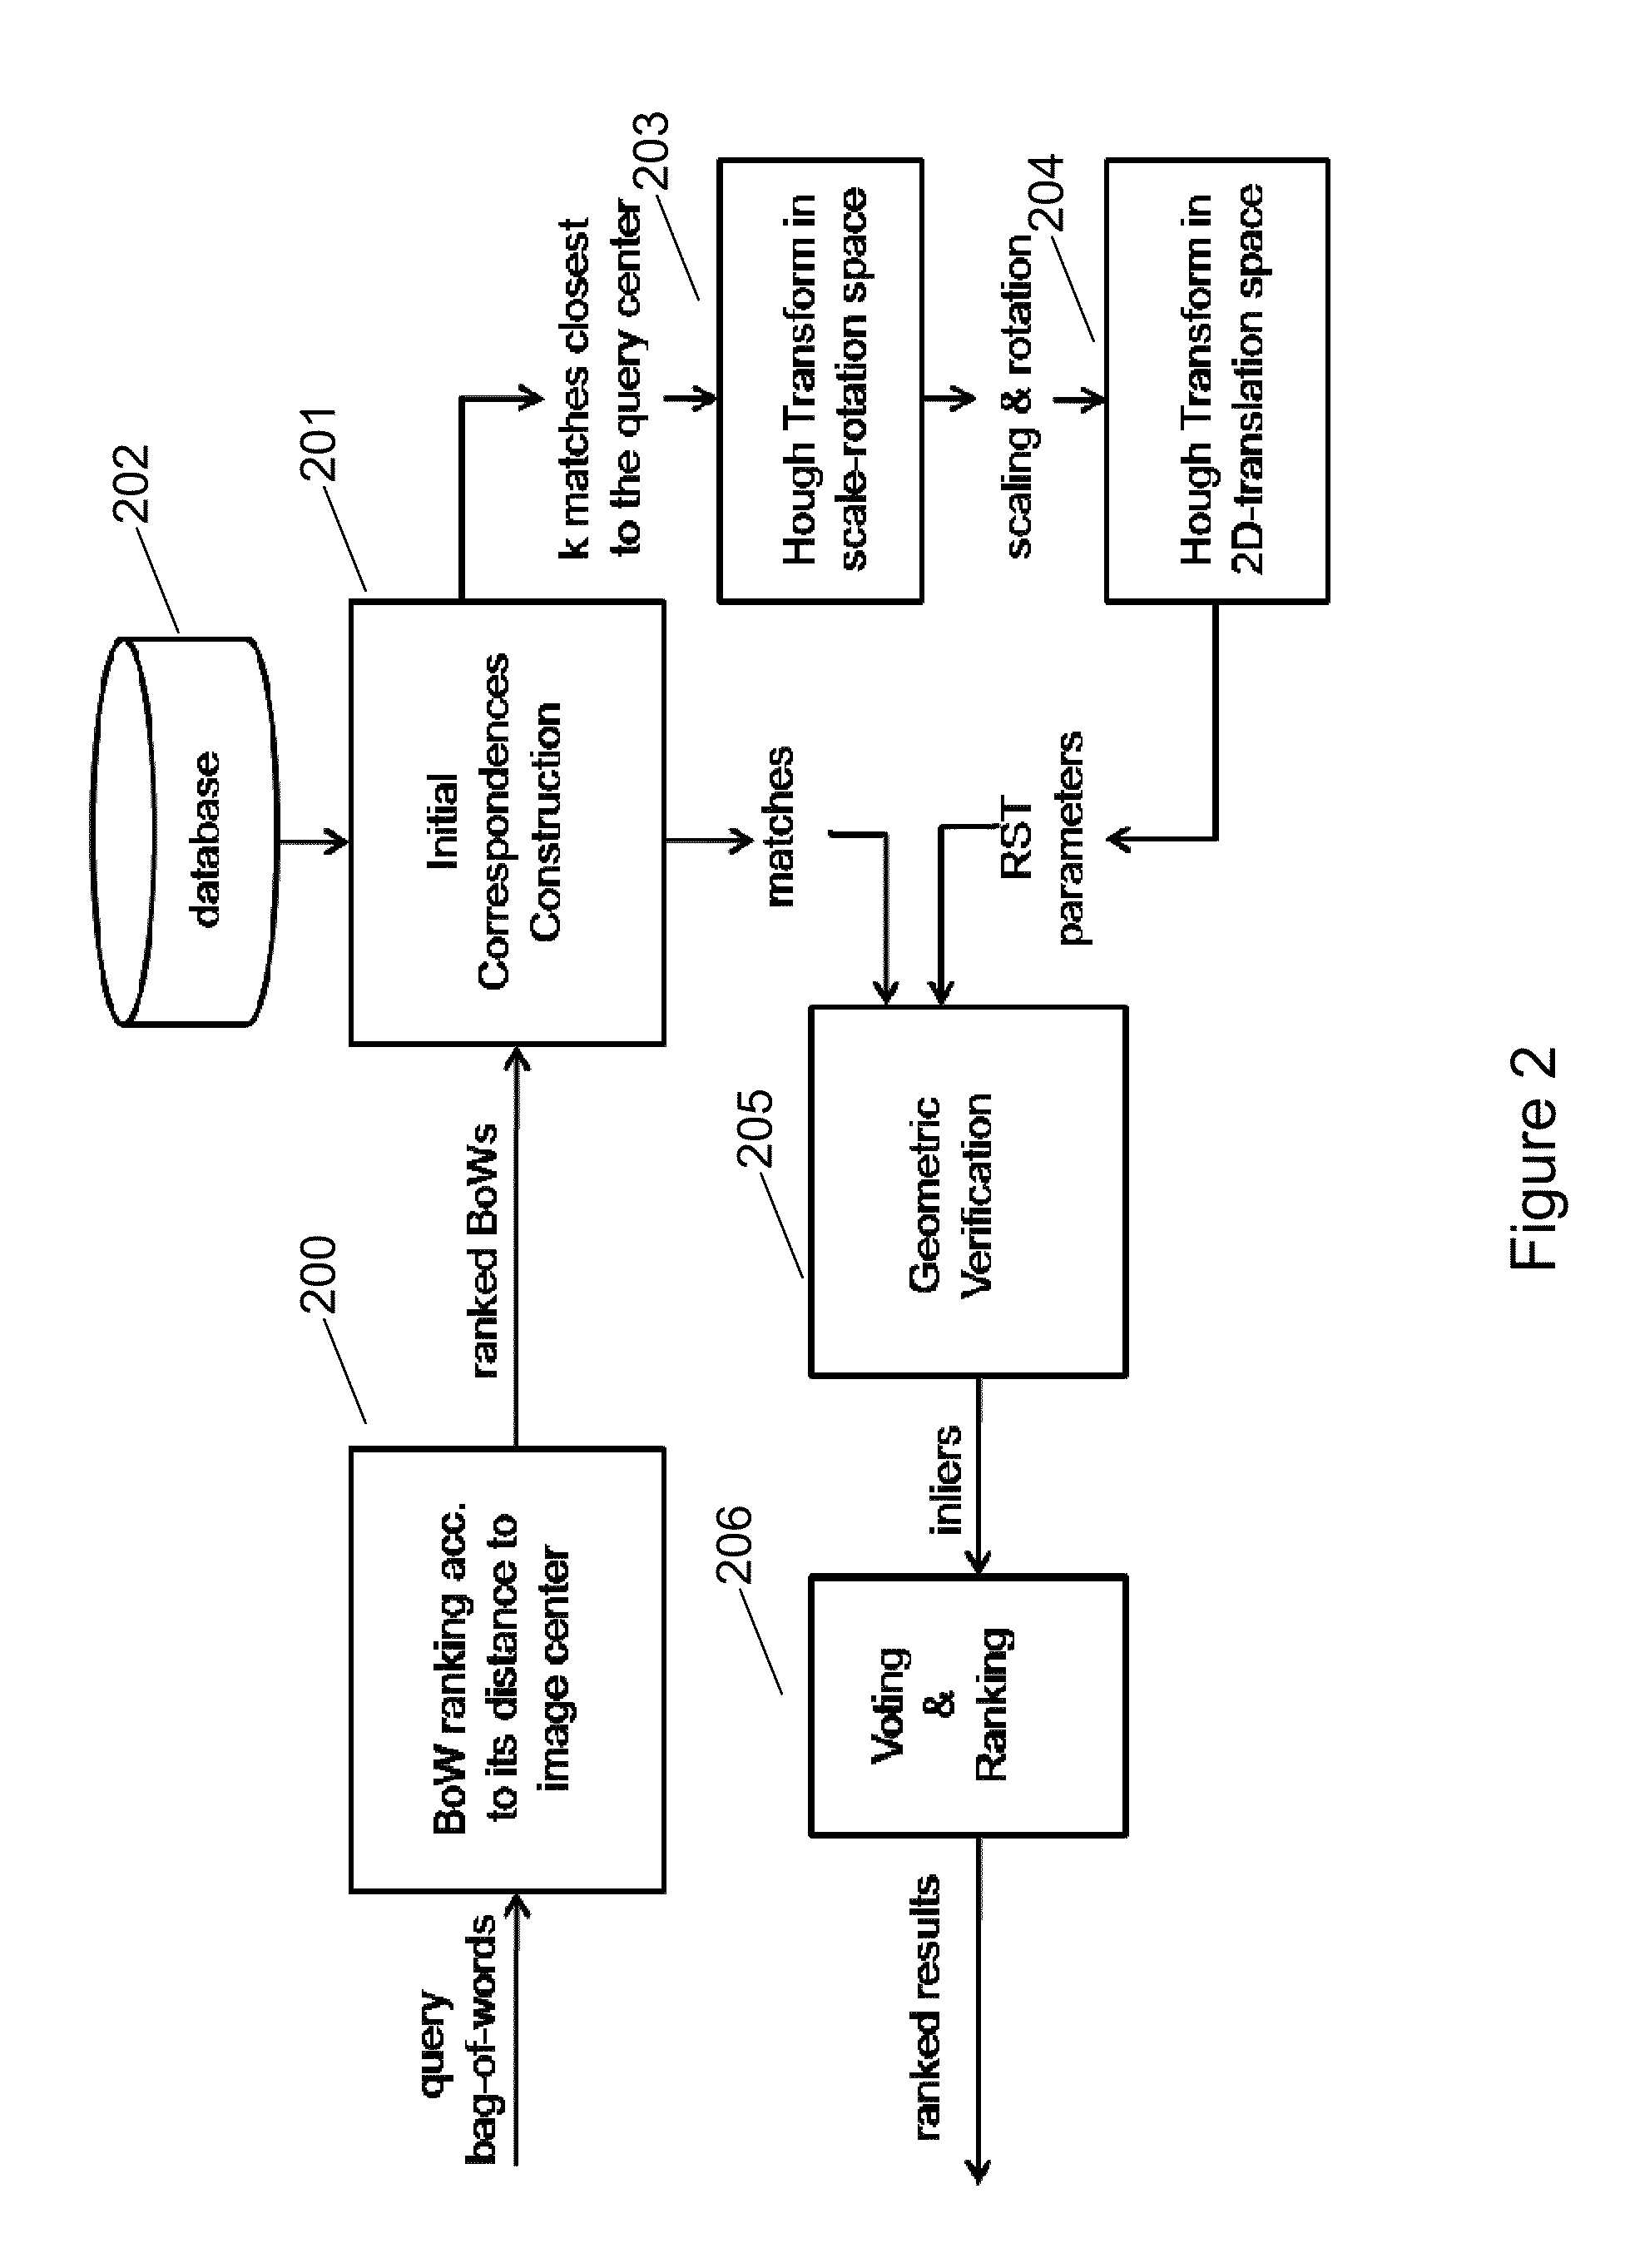 Methods for improving image search in large-scale databases